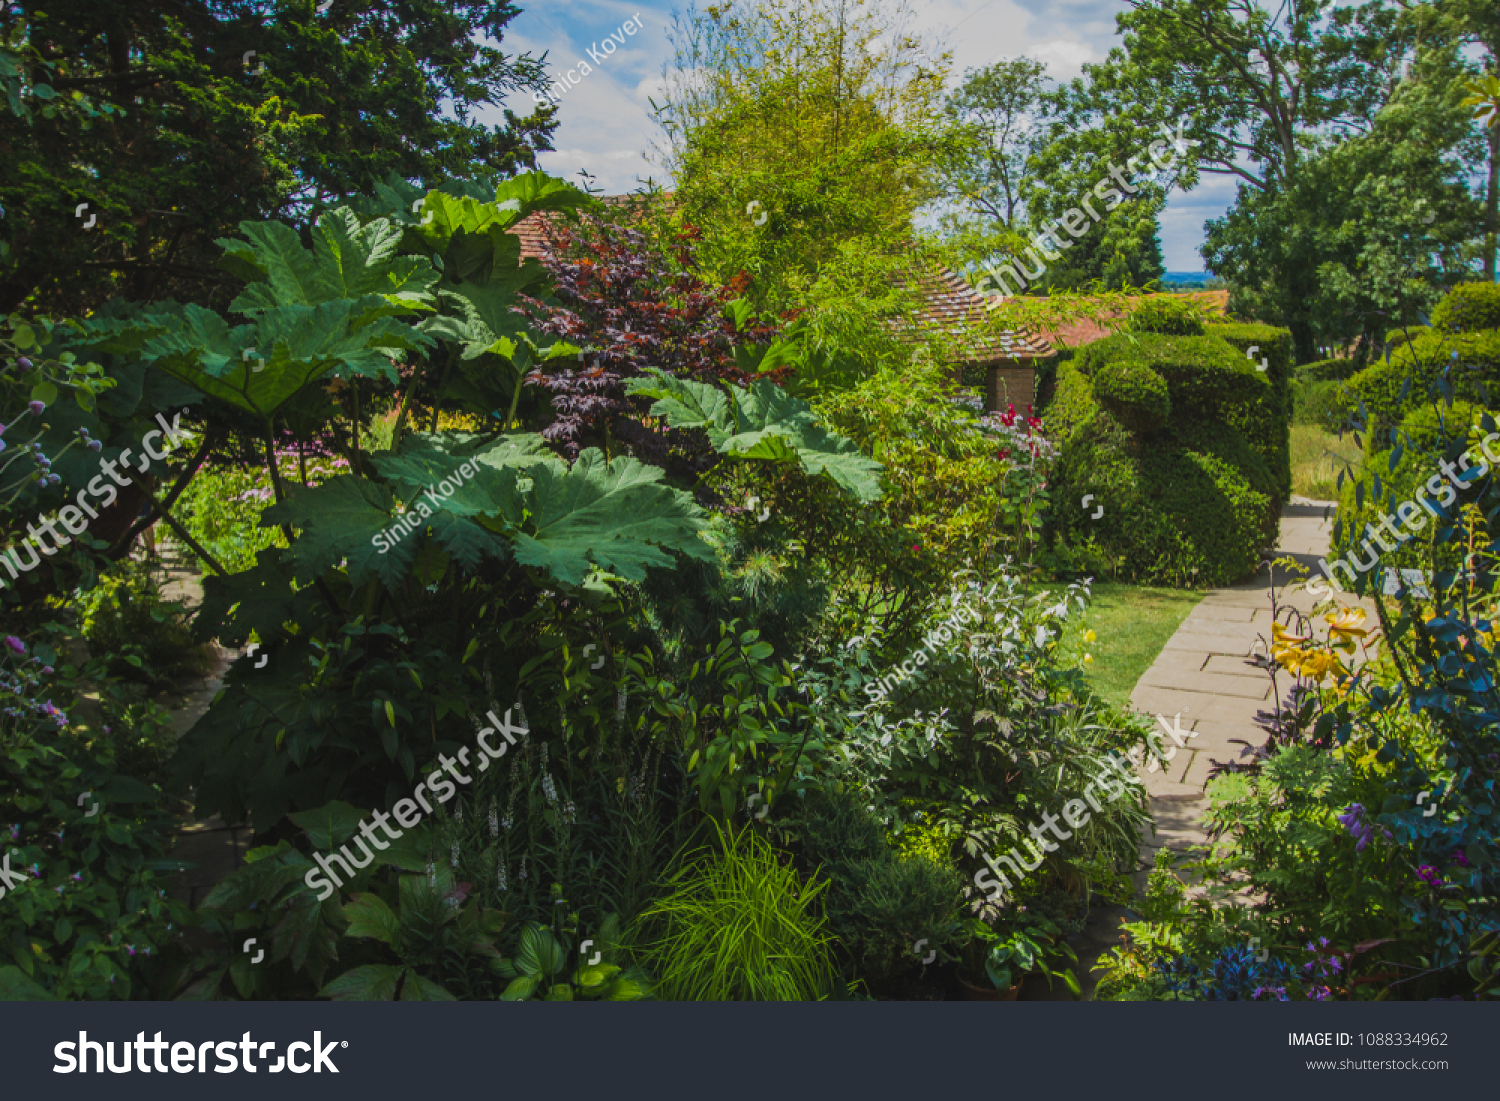 Great Dixter is a house and gardens in Northiam, East Sussex #1088334962